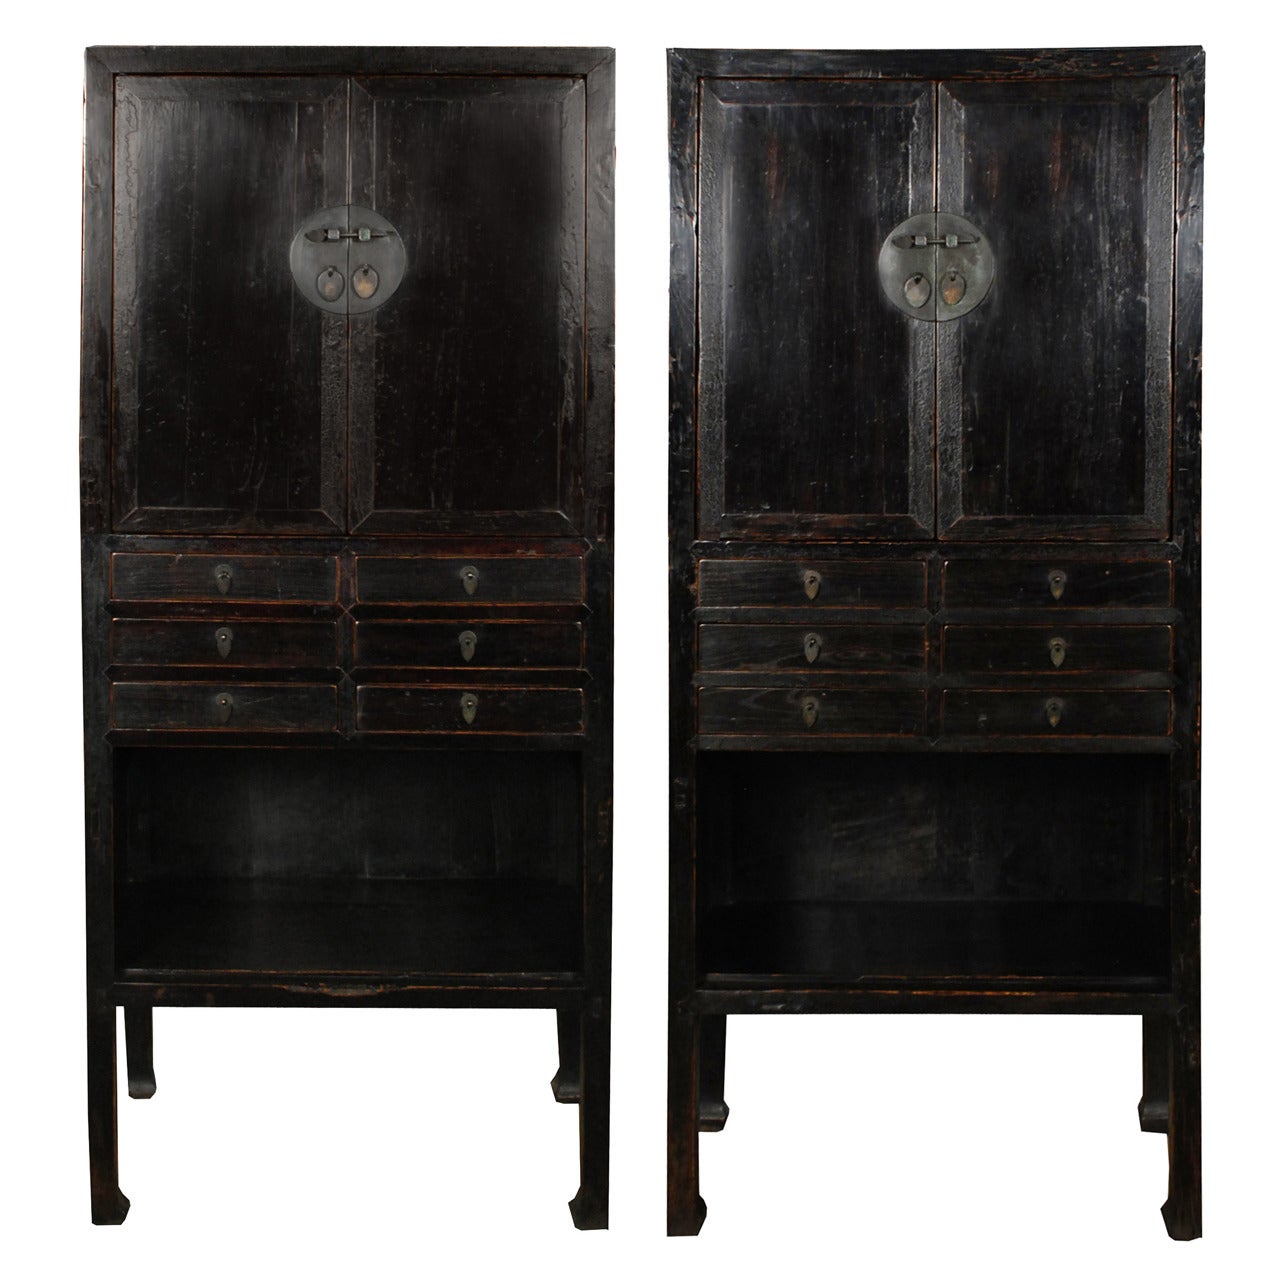 19th Century Chinese Apothecary Cabinet